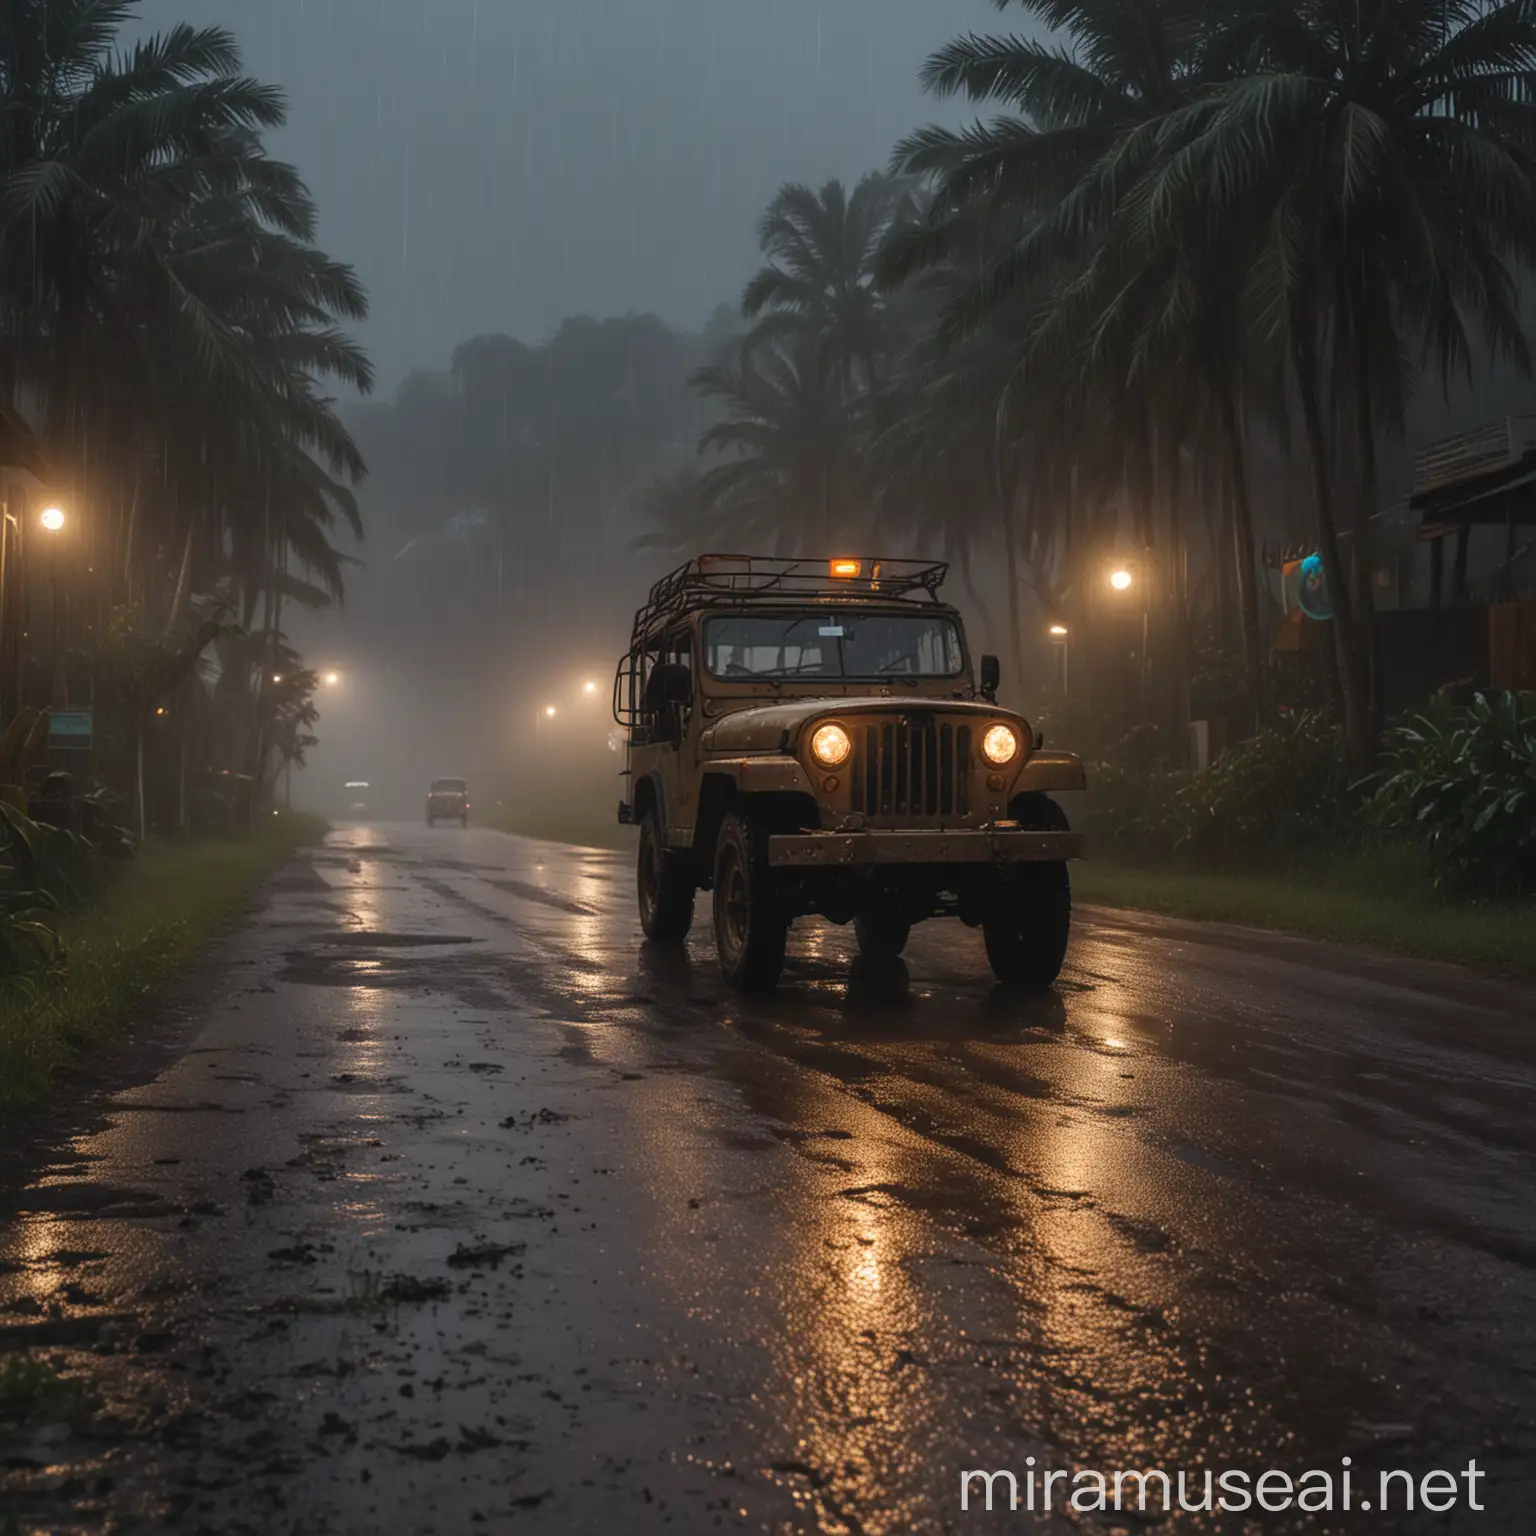 an old jeep heading towards an old resort at night, a girl standing beside the road, raining heavily
